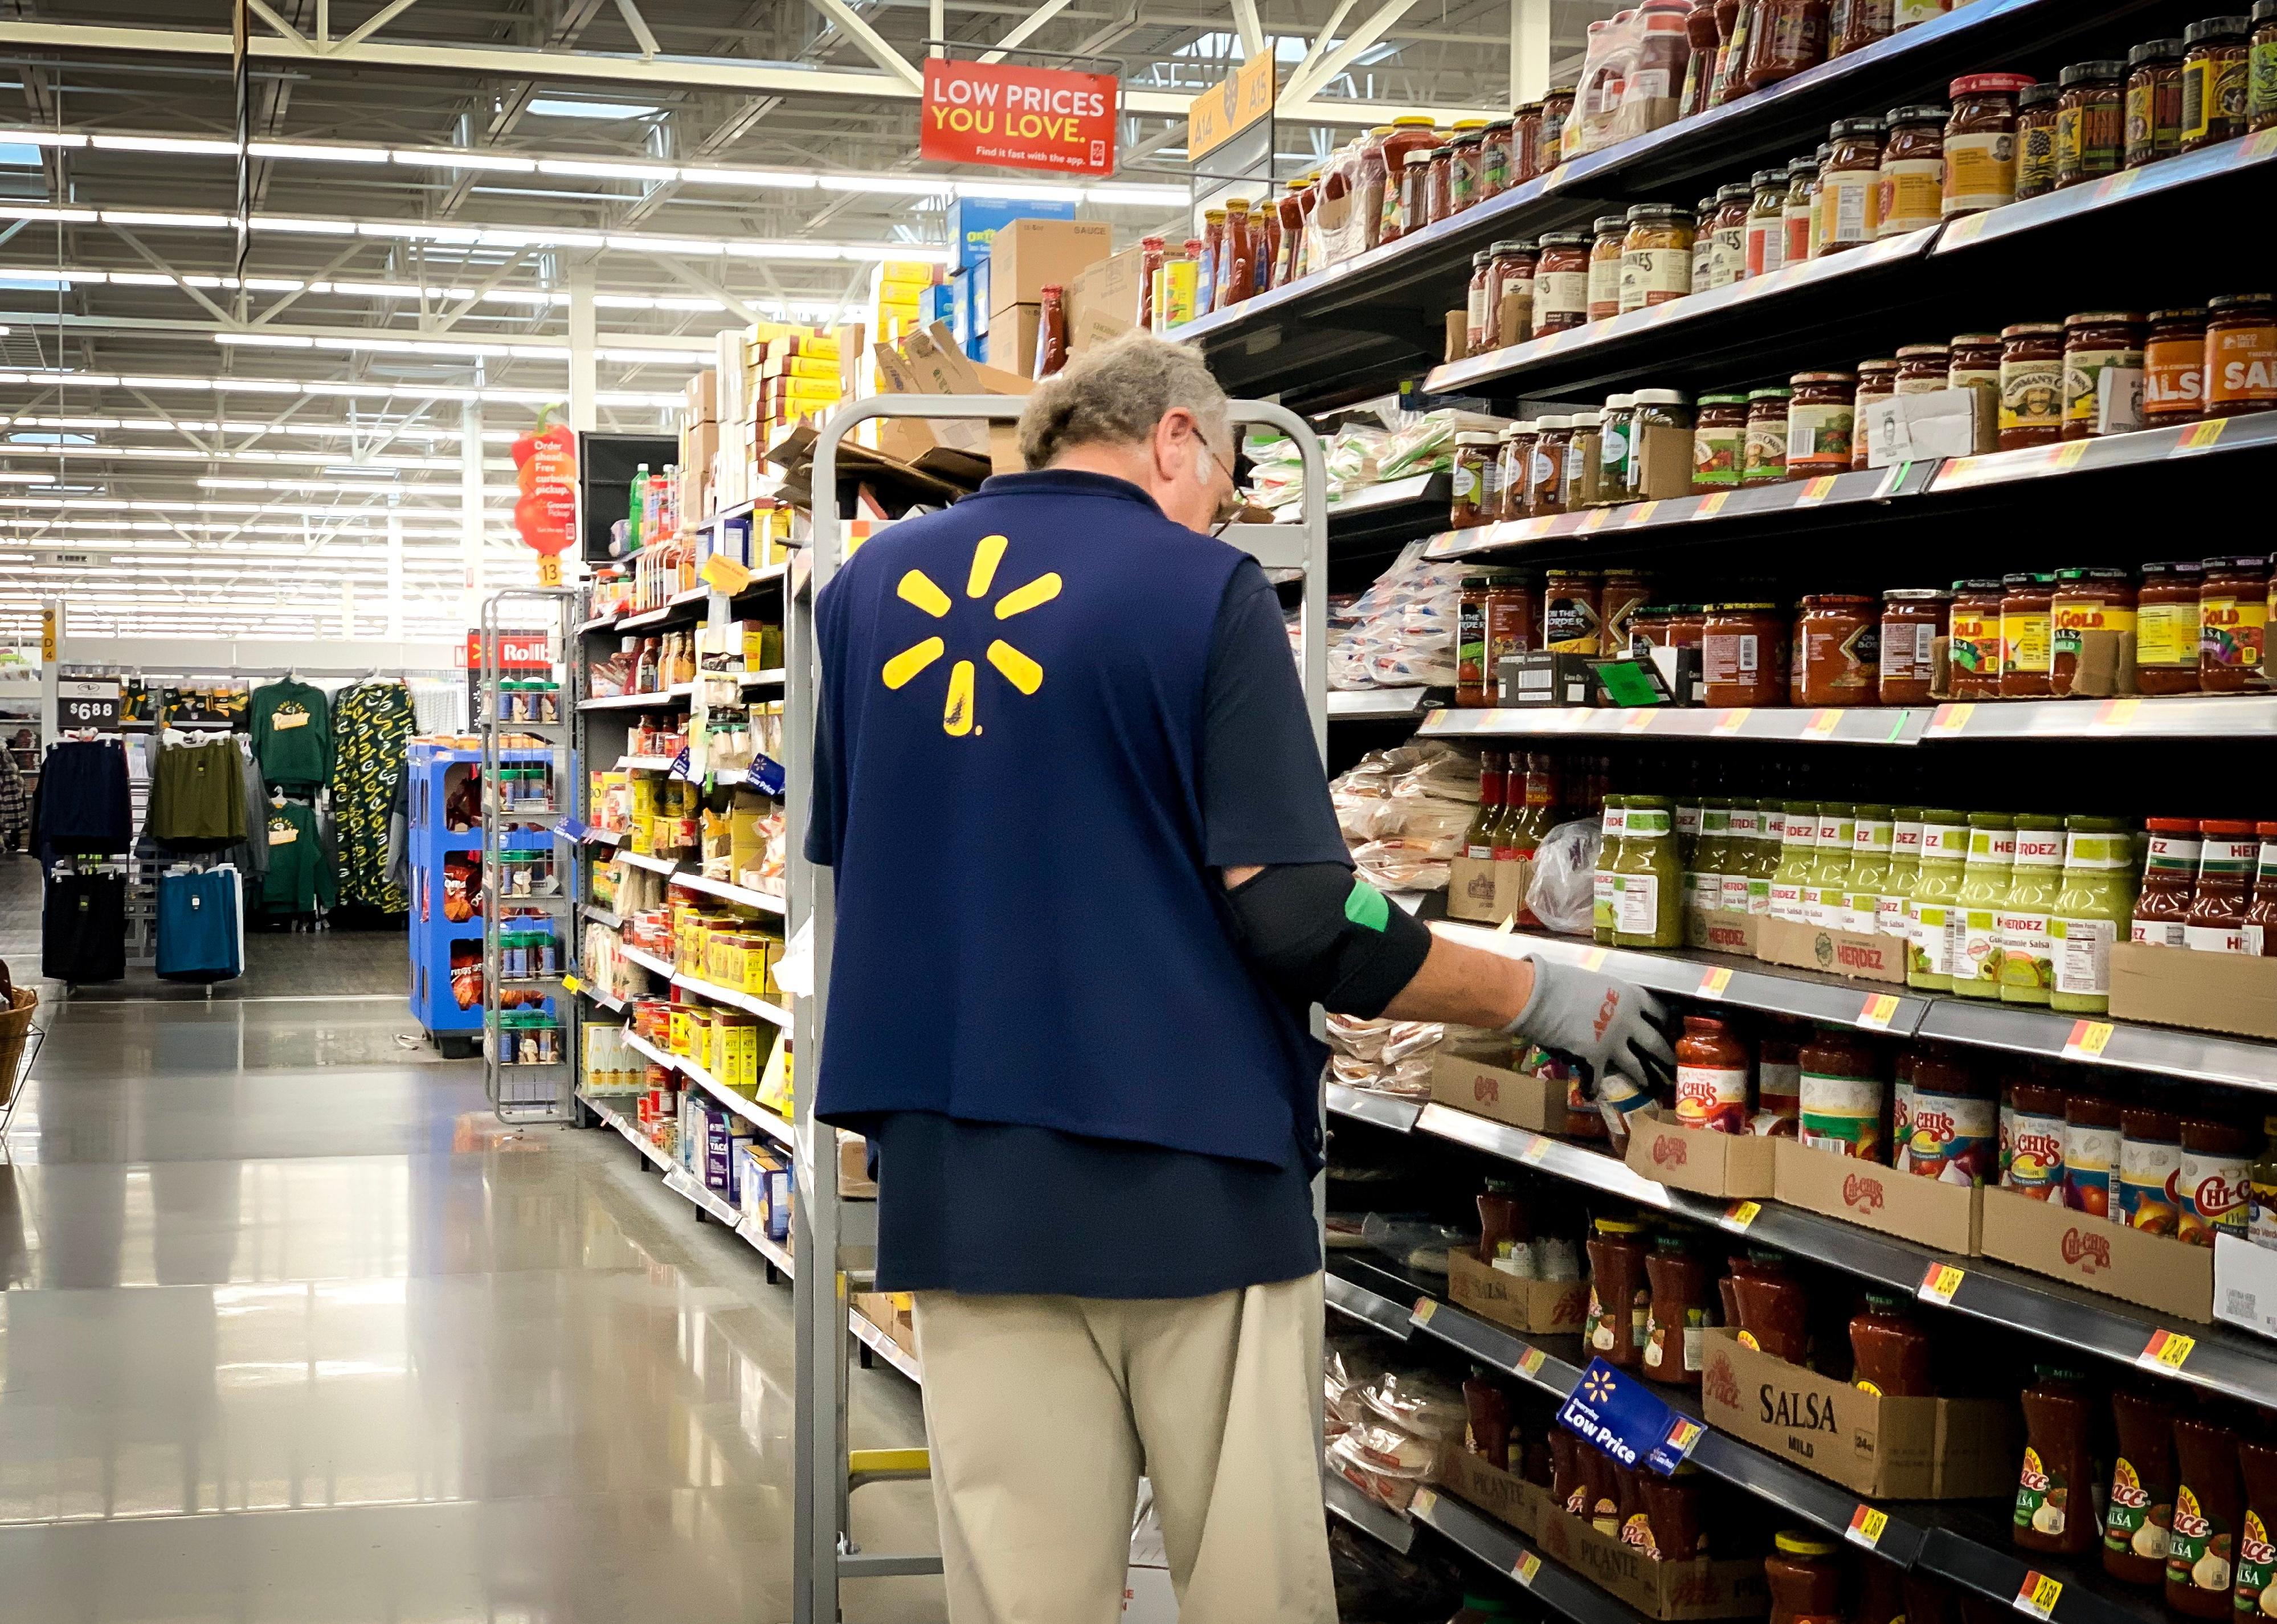 Walmart employees sorting products